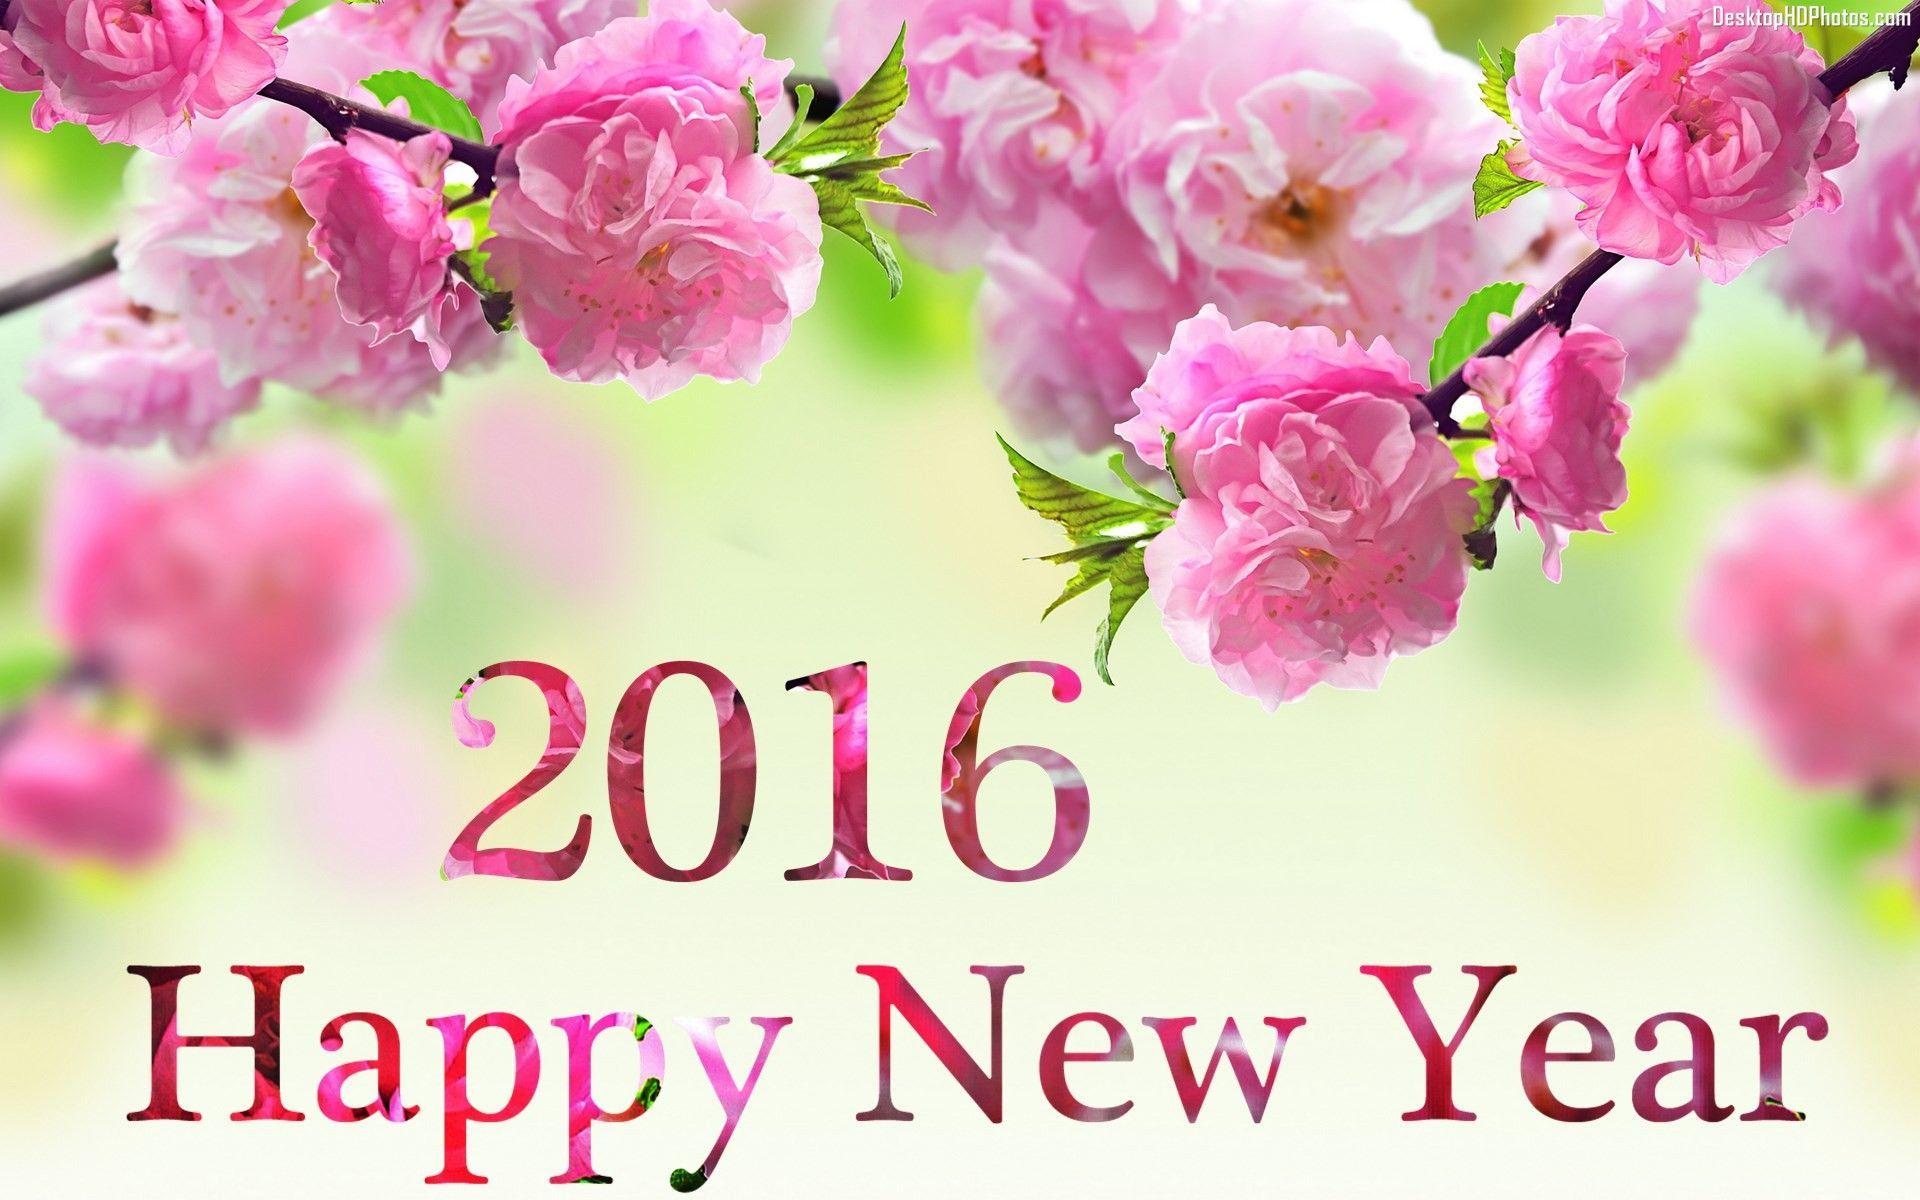 Happy New Year 2016 HD Wallpaper Free Download